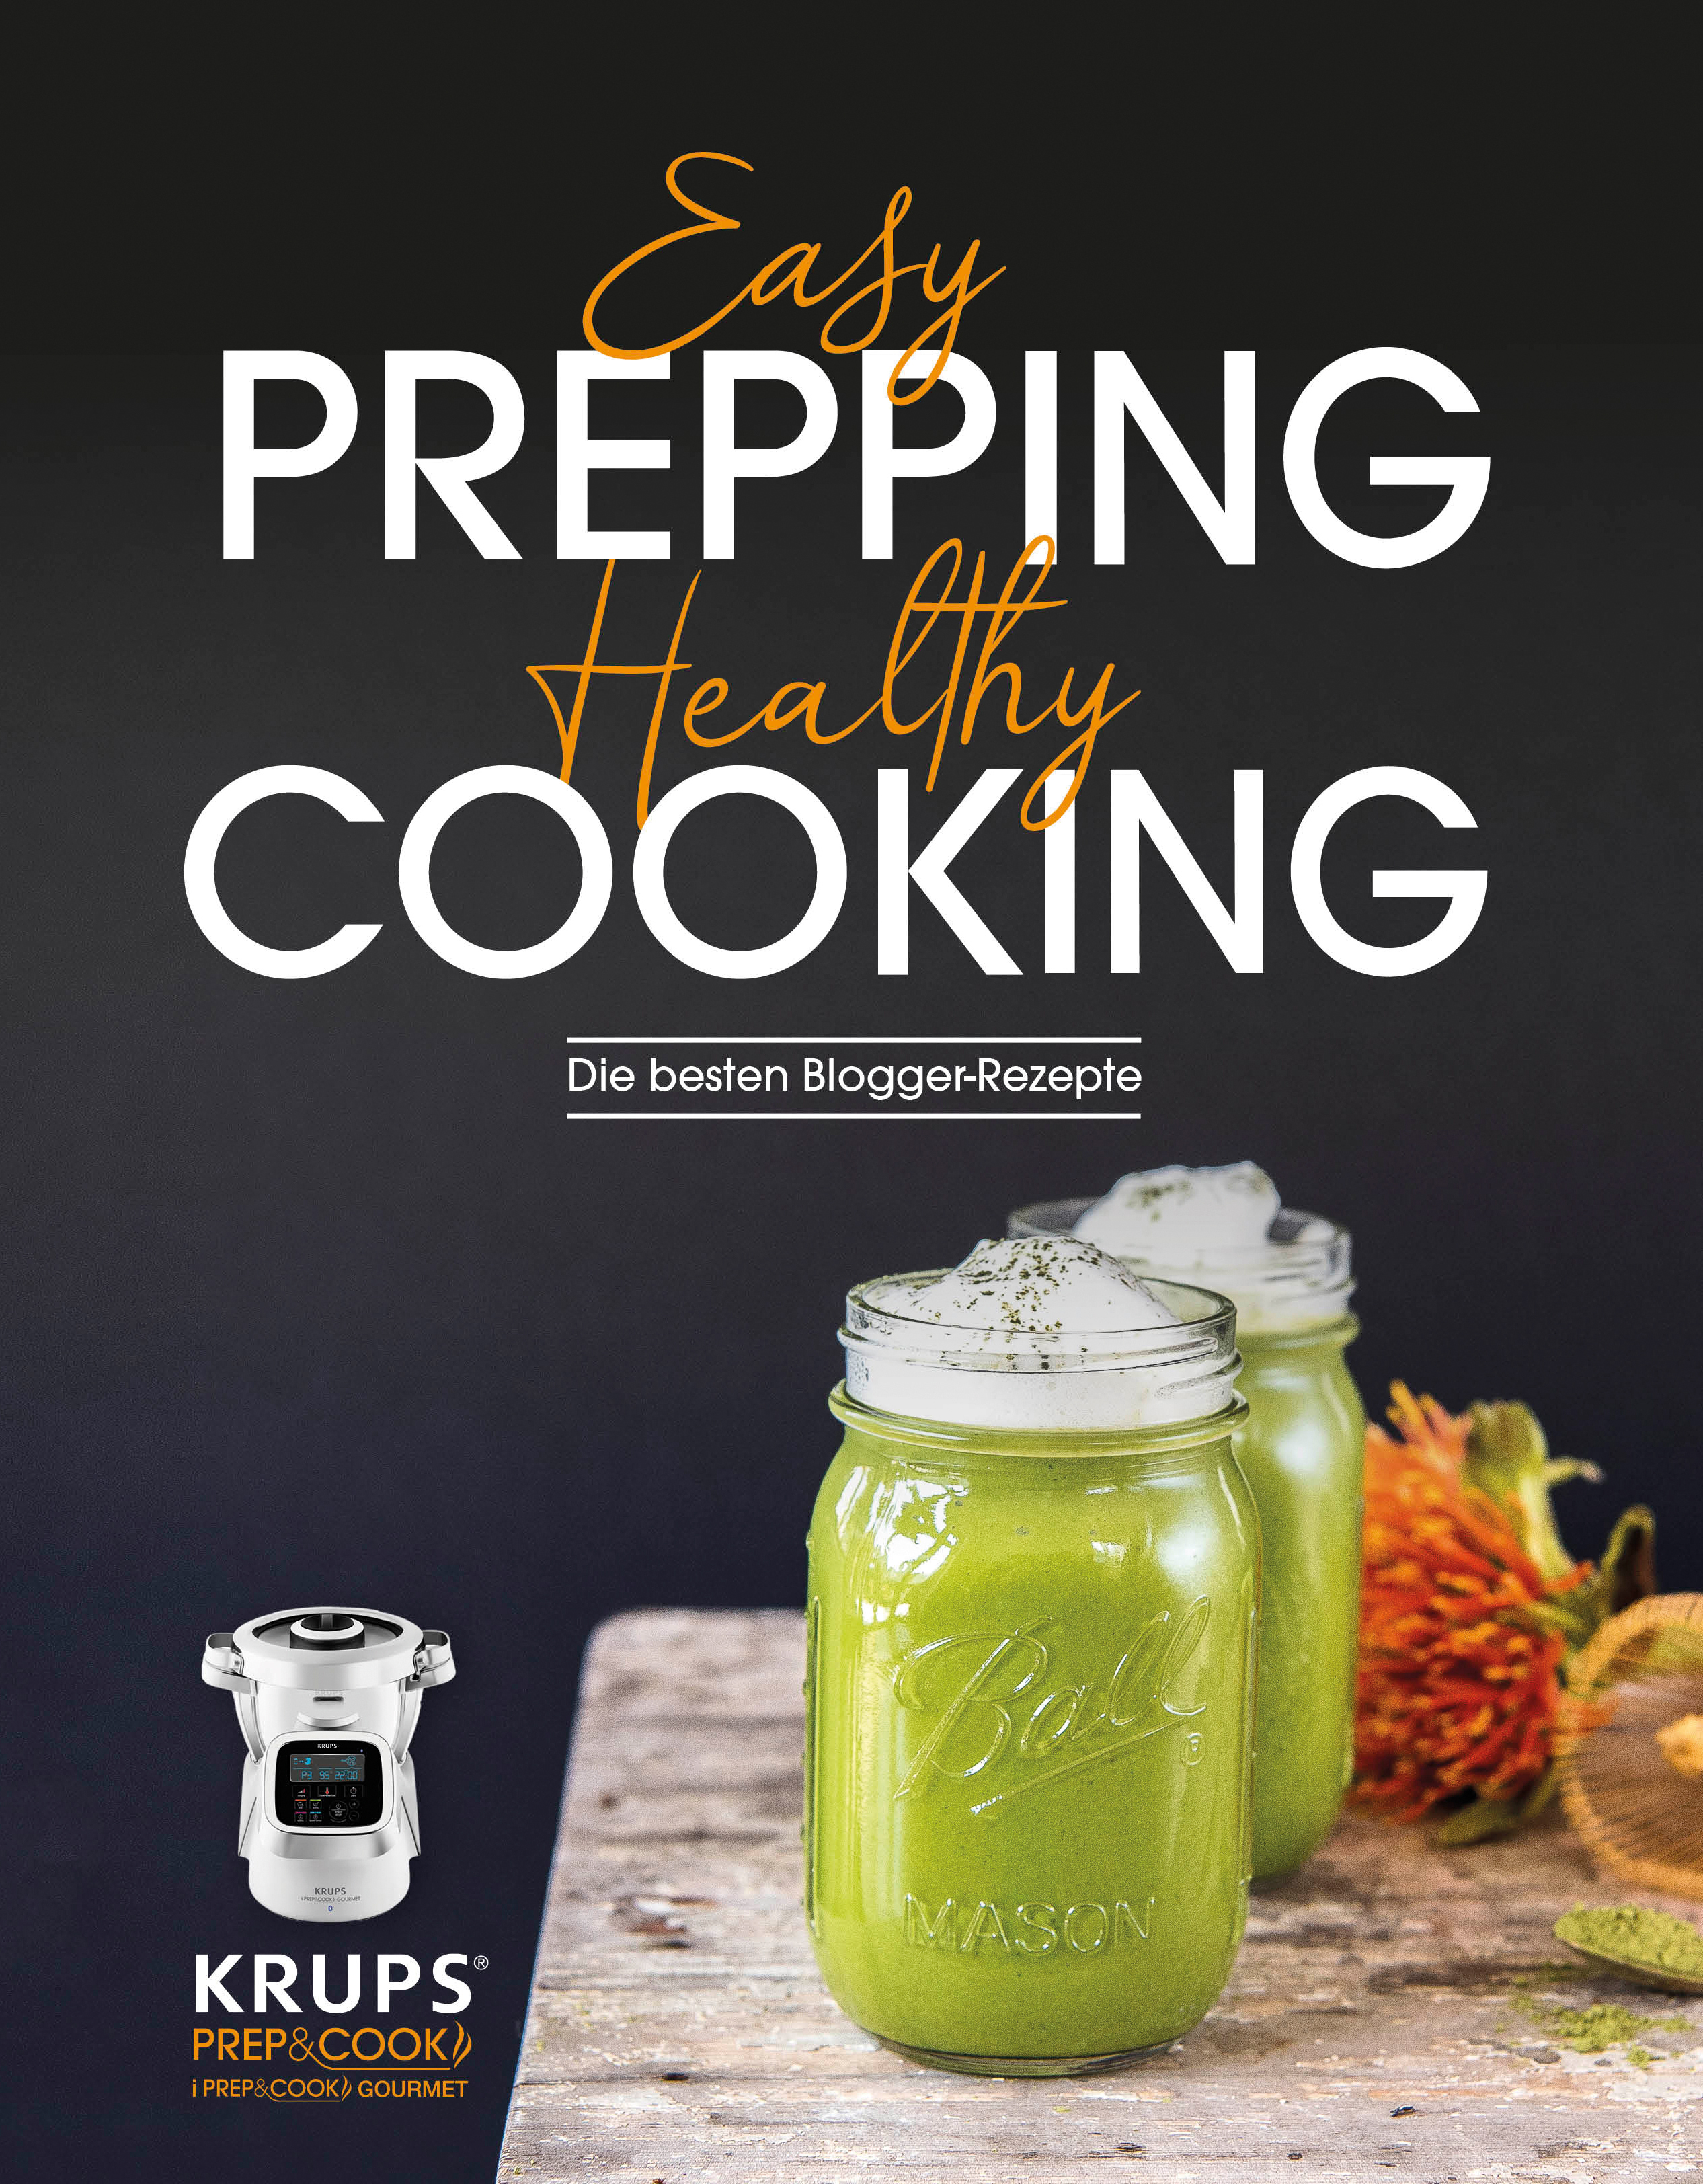 Blogger Prepping, Cooking HP1234.01 Prep&Cook Kochbuch Healthy KRUPS Easy